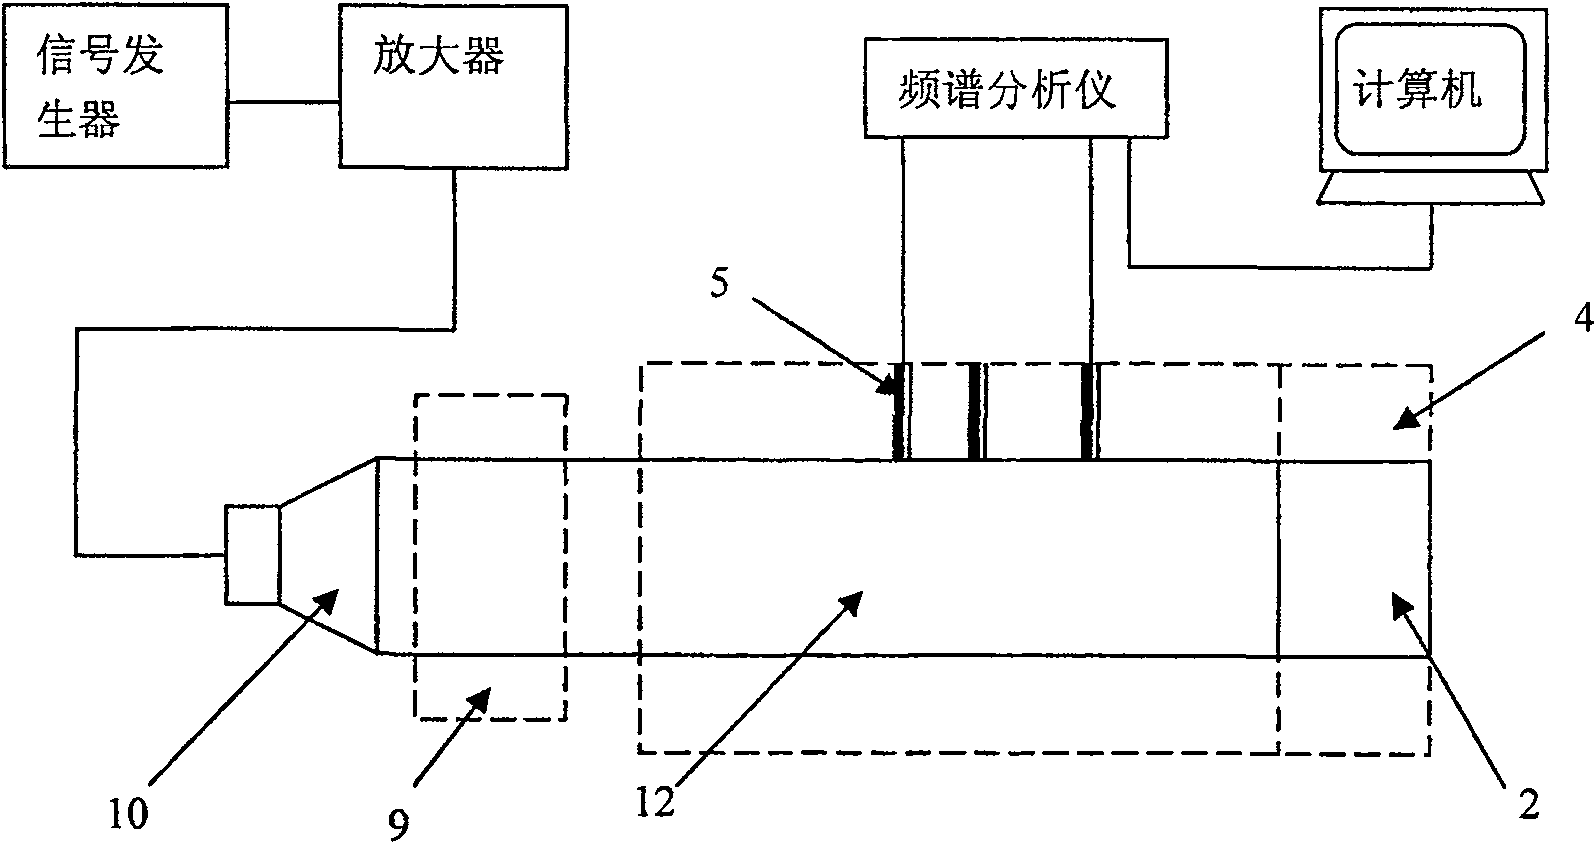 Acoustic absorbent high-temperature sound absorption performance test apparatus